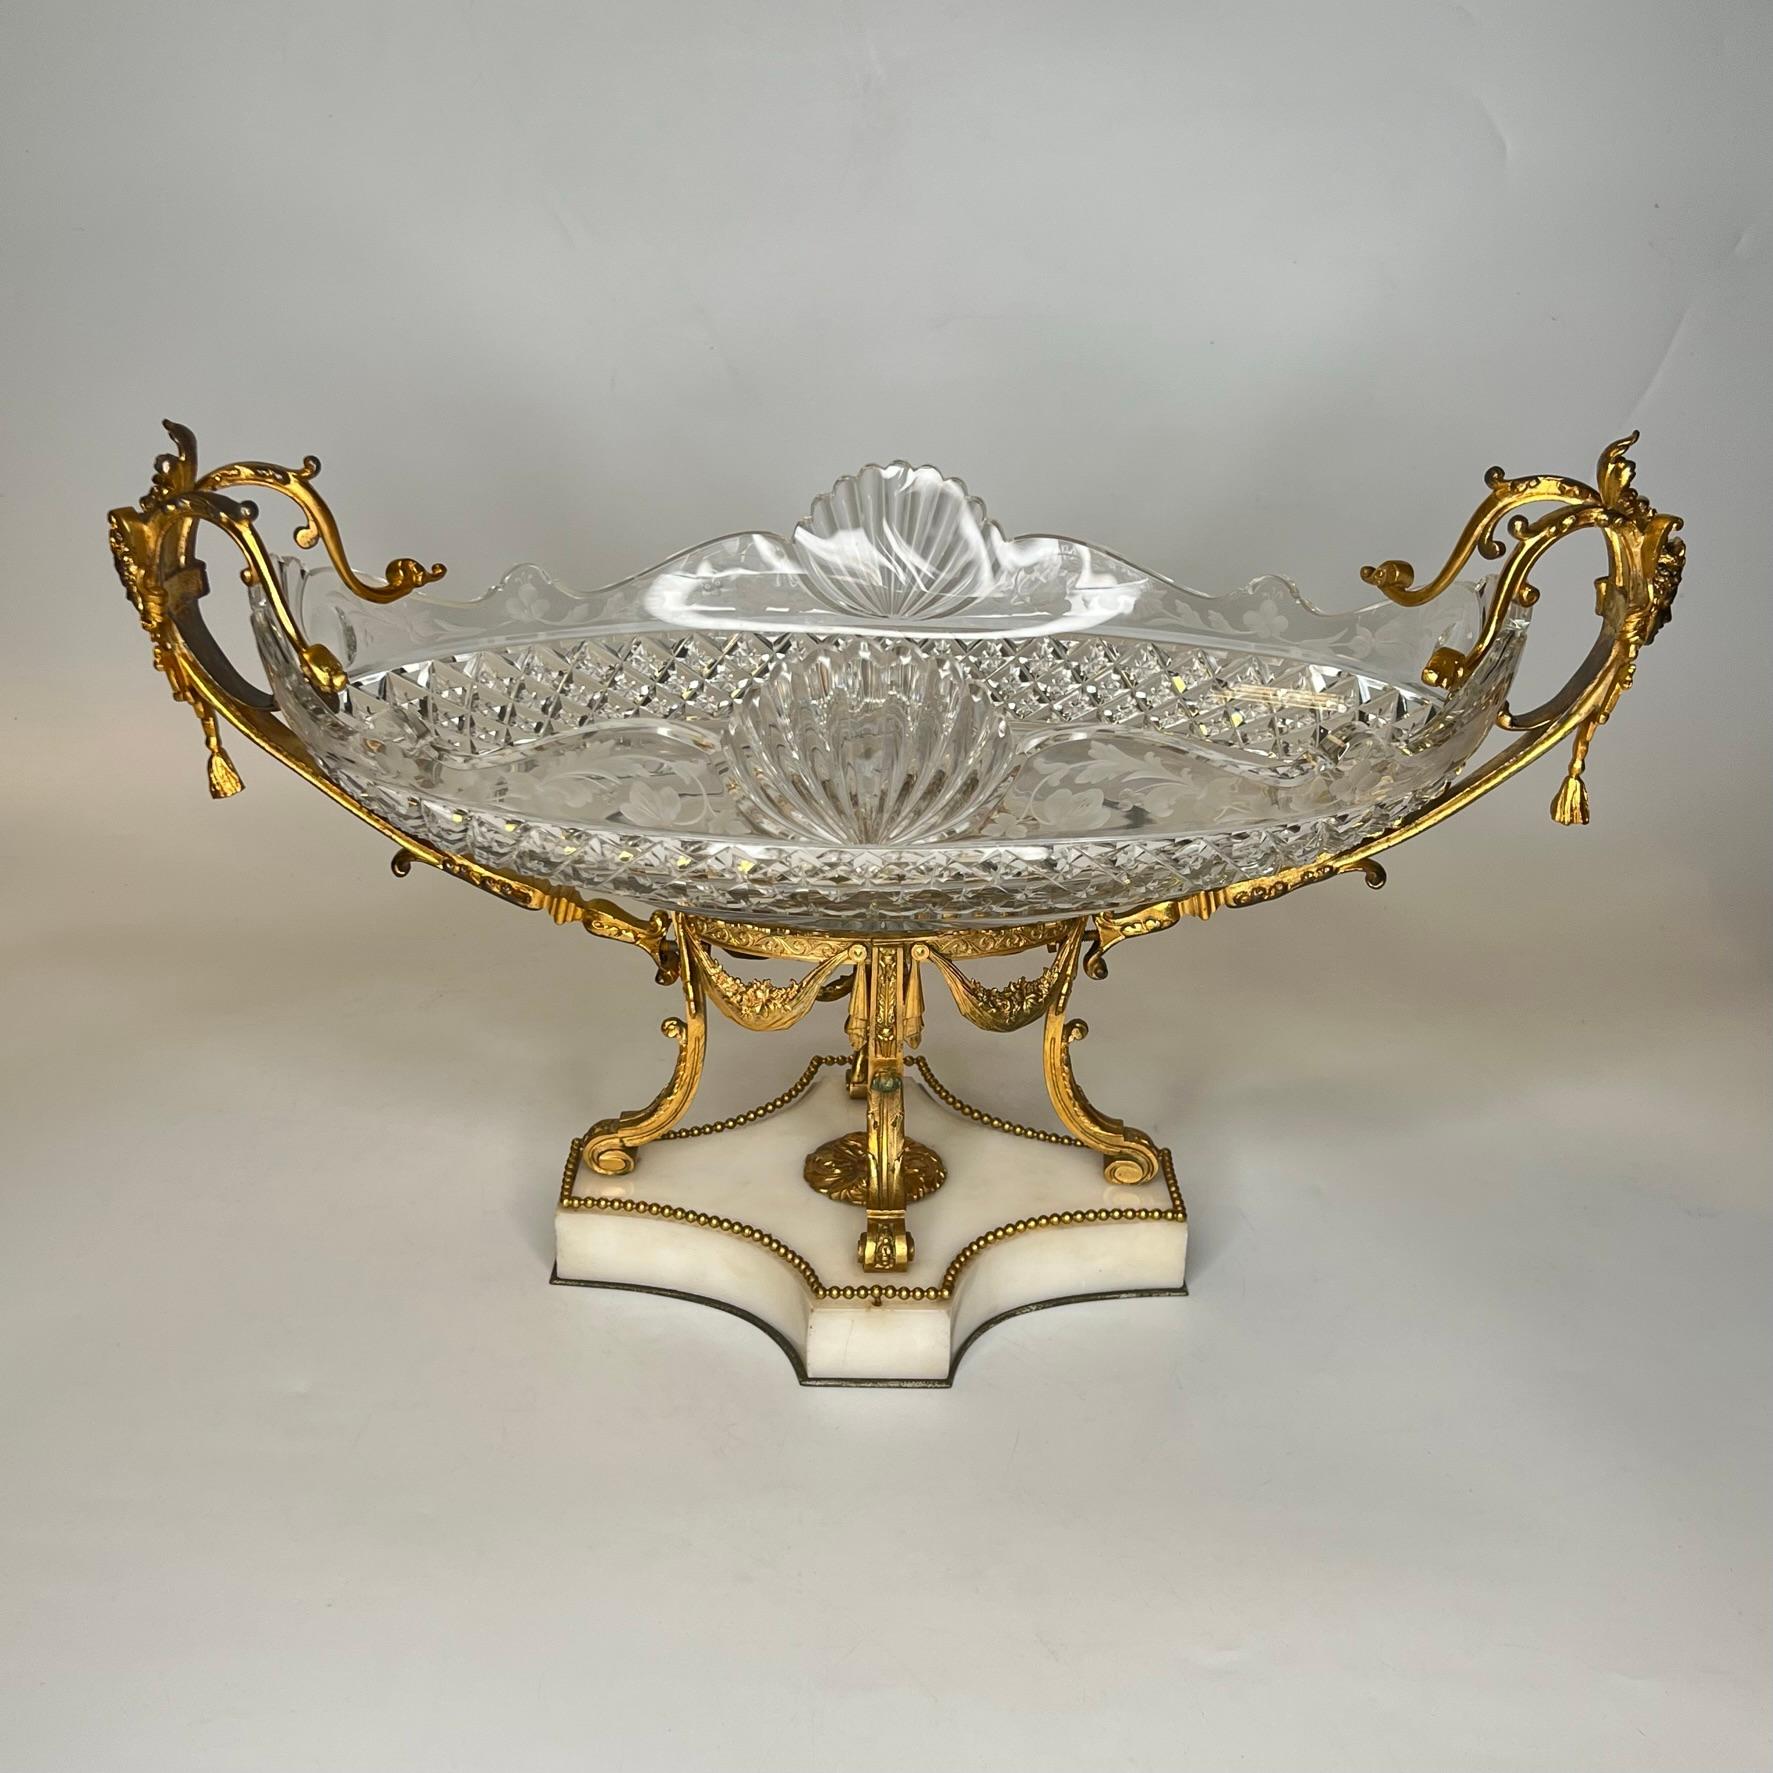 Our French centerpiece, circa 1880, features a large oval shaped glass bowl exquisitely cut with diamond and shell motifs and engraved with floral designs on the sides, and an ormolu bronze frame with neoclassical goddess masks at the handles, and